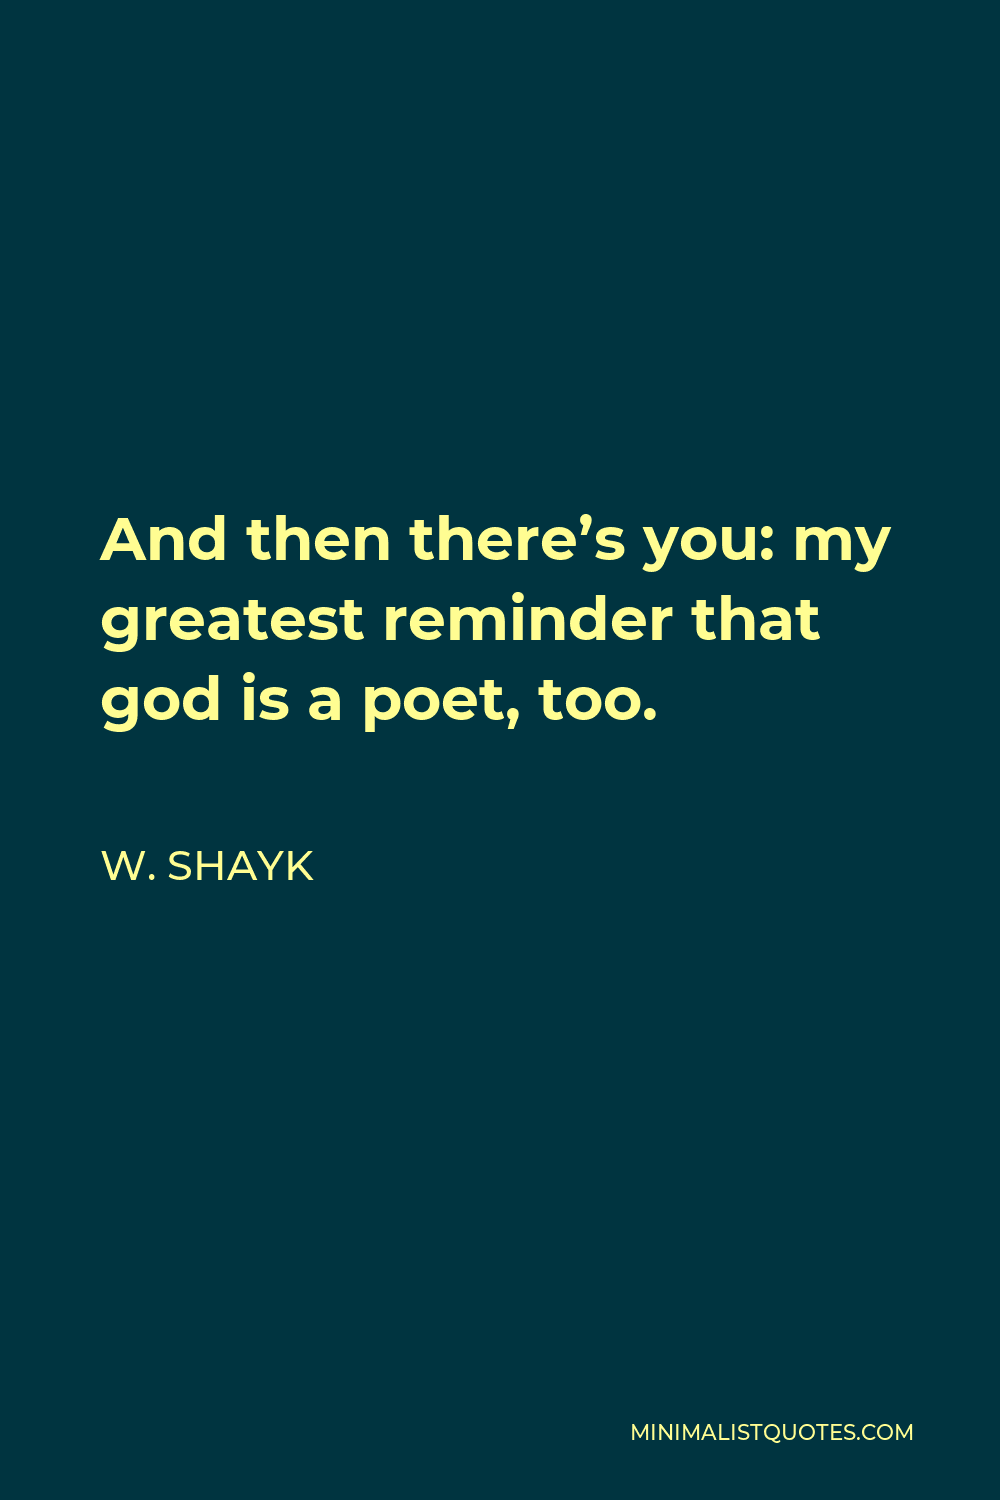 W. Shayk Quote - And then there’s you: my greatest reminder that god is a poet, too.